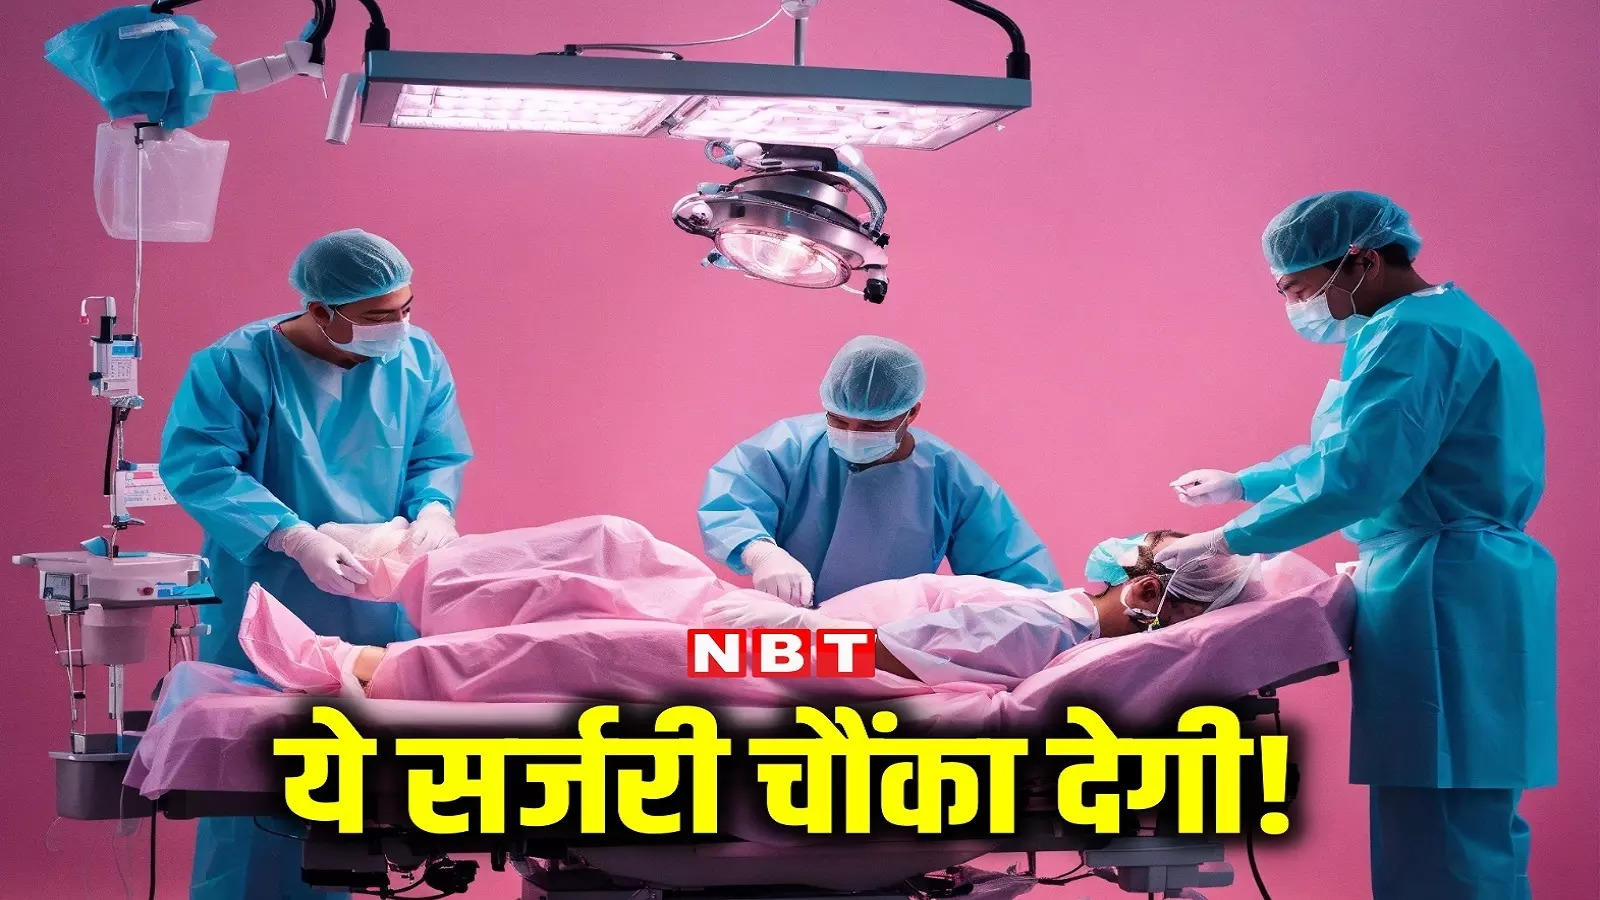 Miracle of science! The patient was in Rohini hospital and the surgeon performed the operation from Gurugram